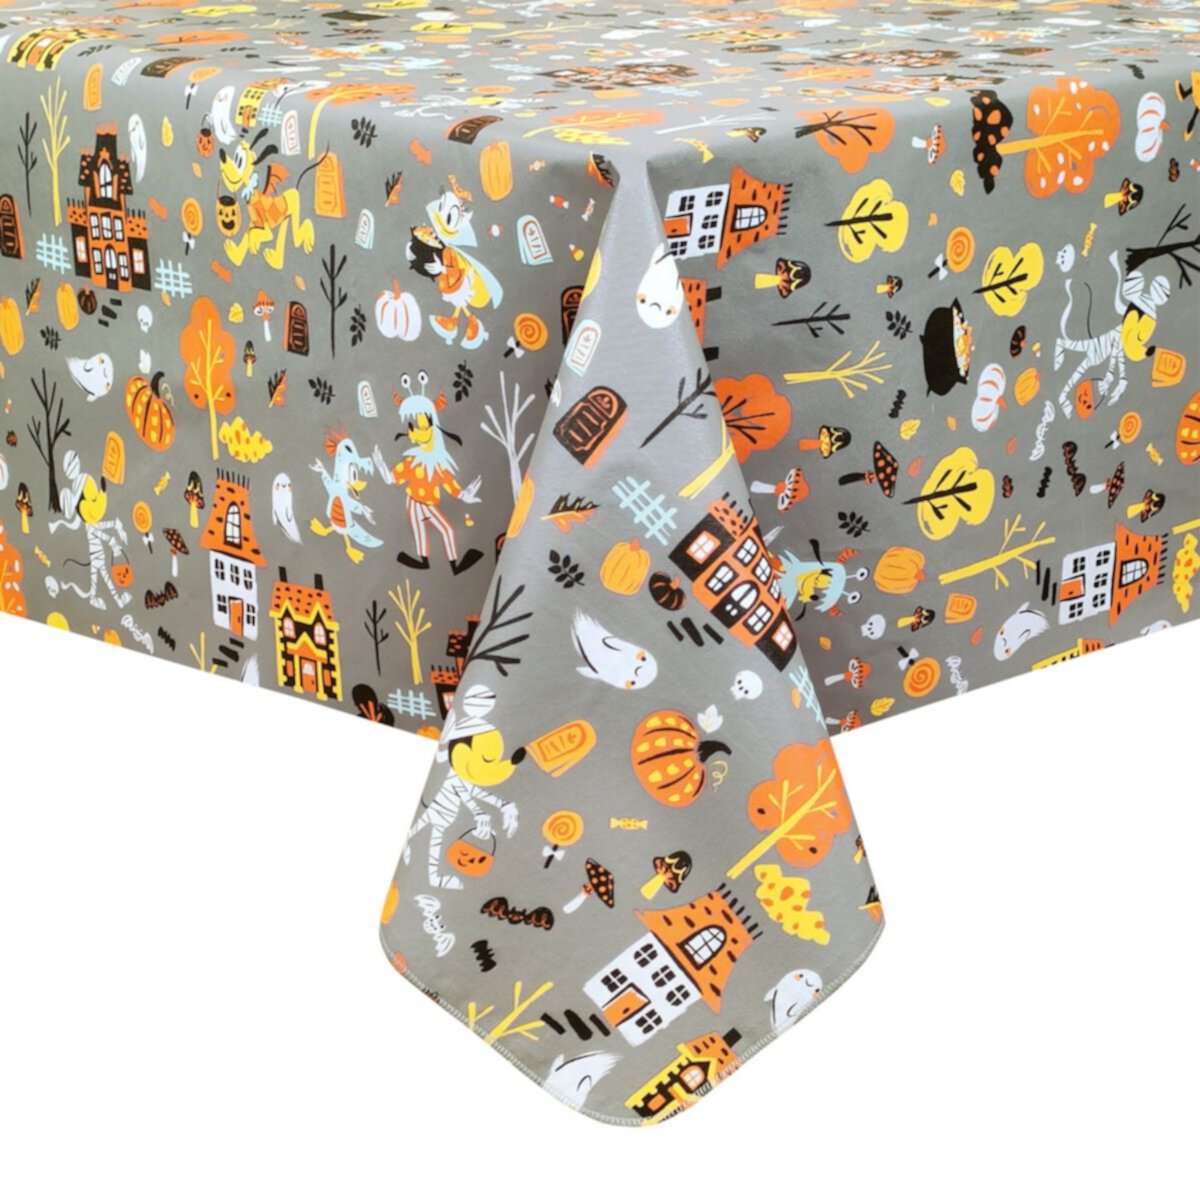 Celebrate Together™ Halloween Mickey Friends Tablecloth Celebrate Together